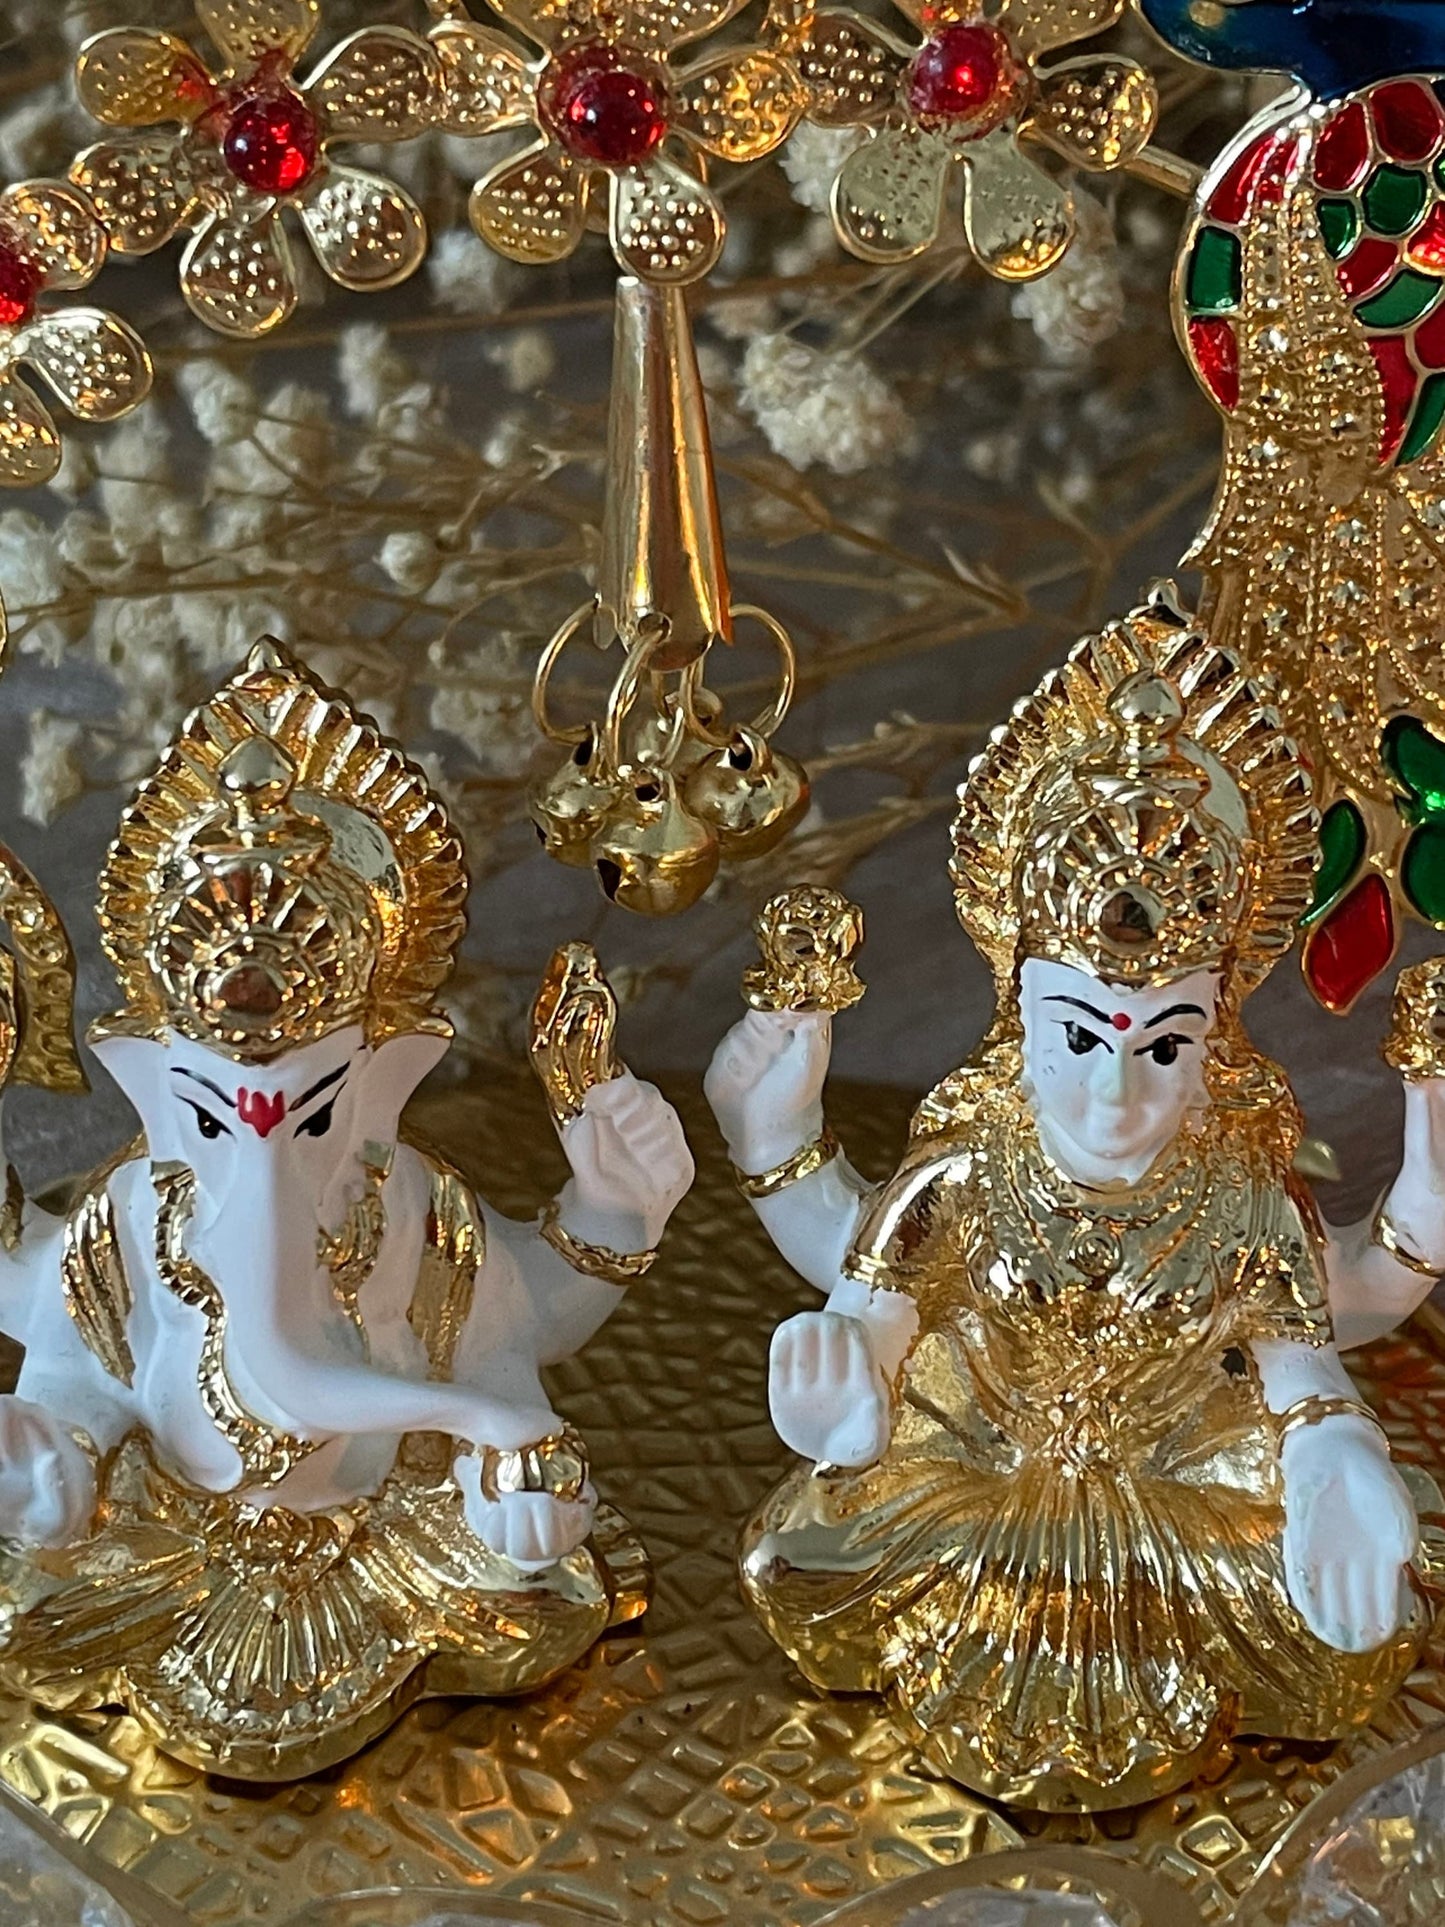 Lakshmi and Ganesh Figurines thumb size Sitting on on a Metal Decoration White Figurines with Golden plating accents Diwali Pooja Gifting